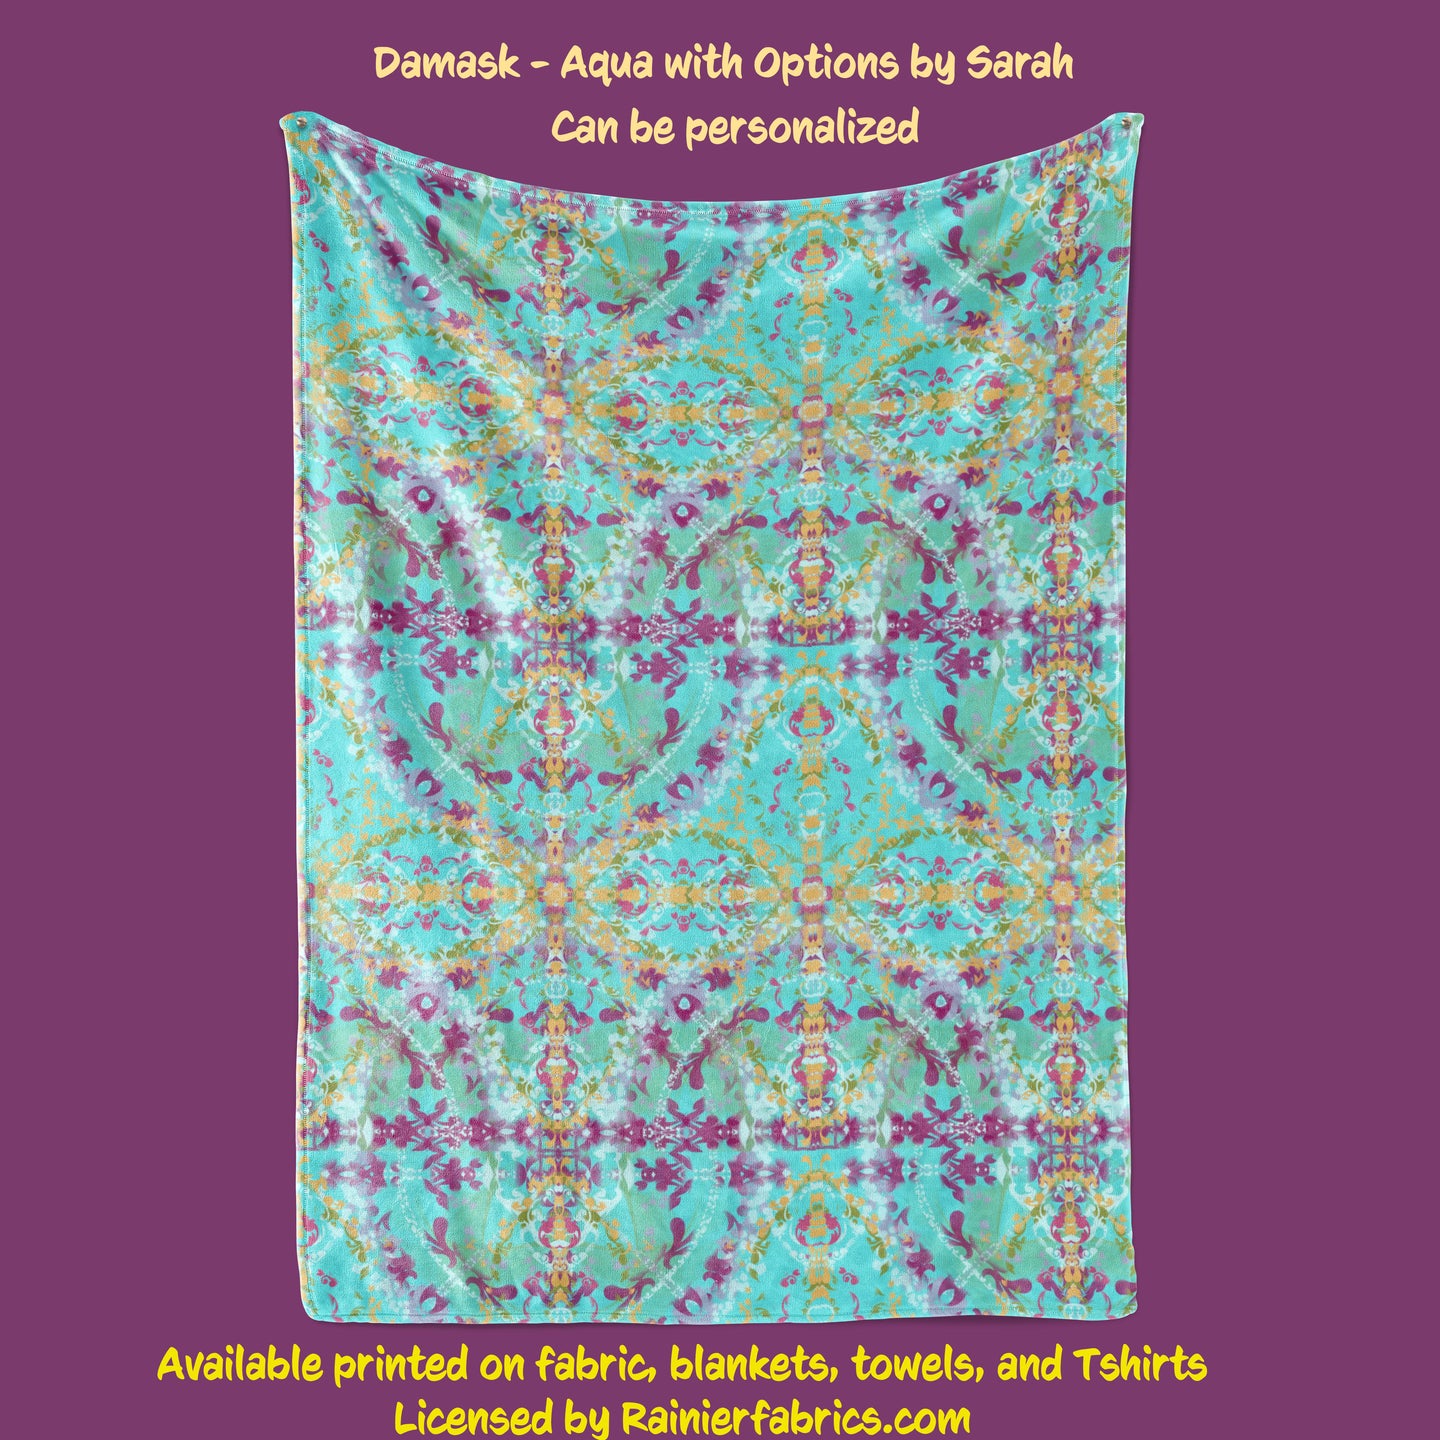 Damask in Aqua, Blue and Teal by Sarah - Blanket